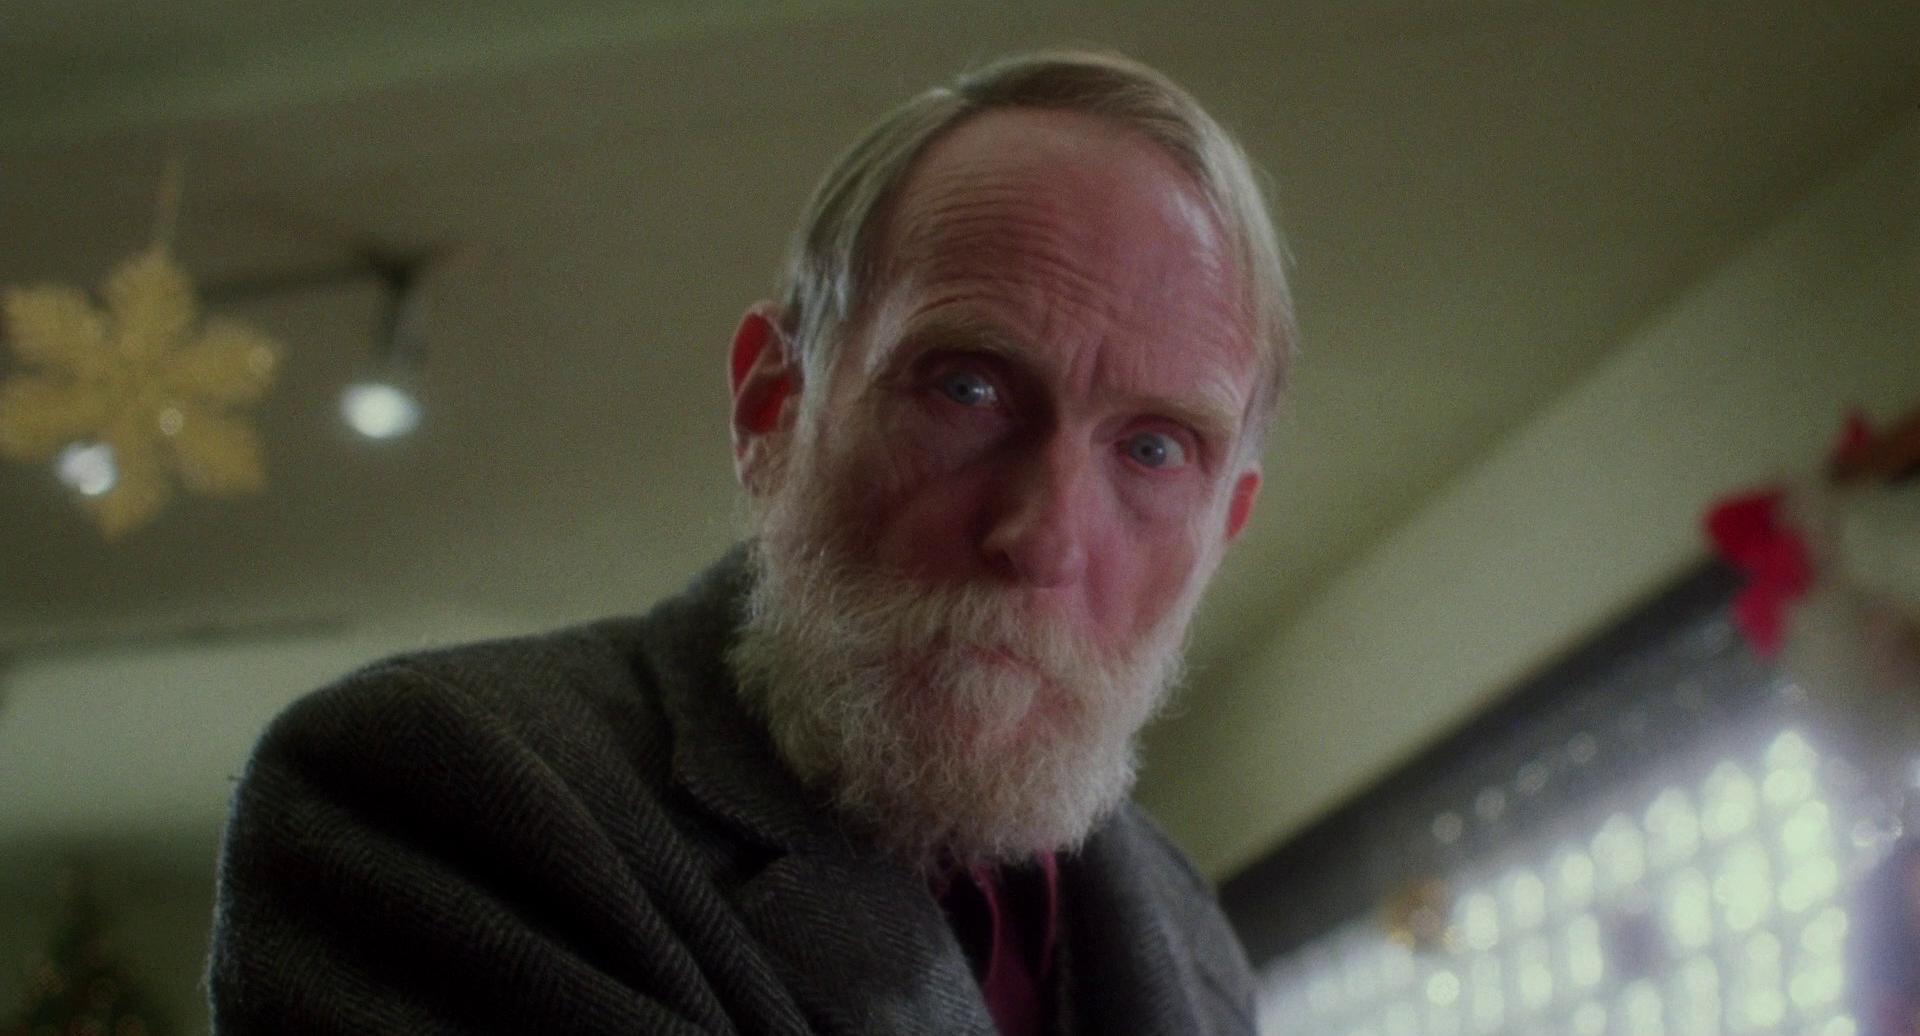 Roberts Blossom in 'Home Alone'